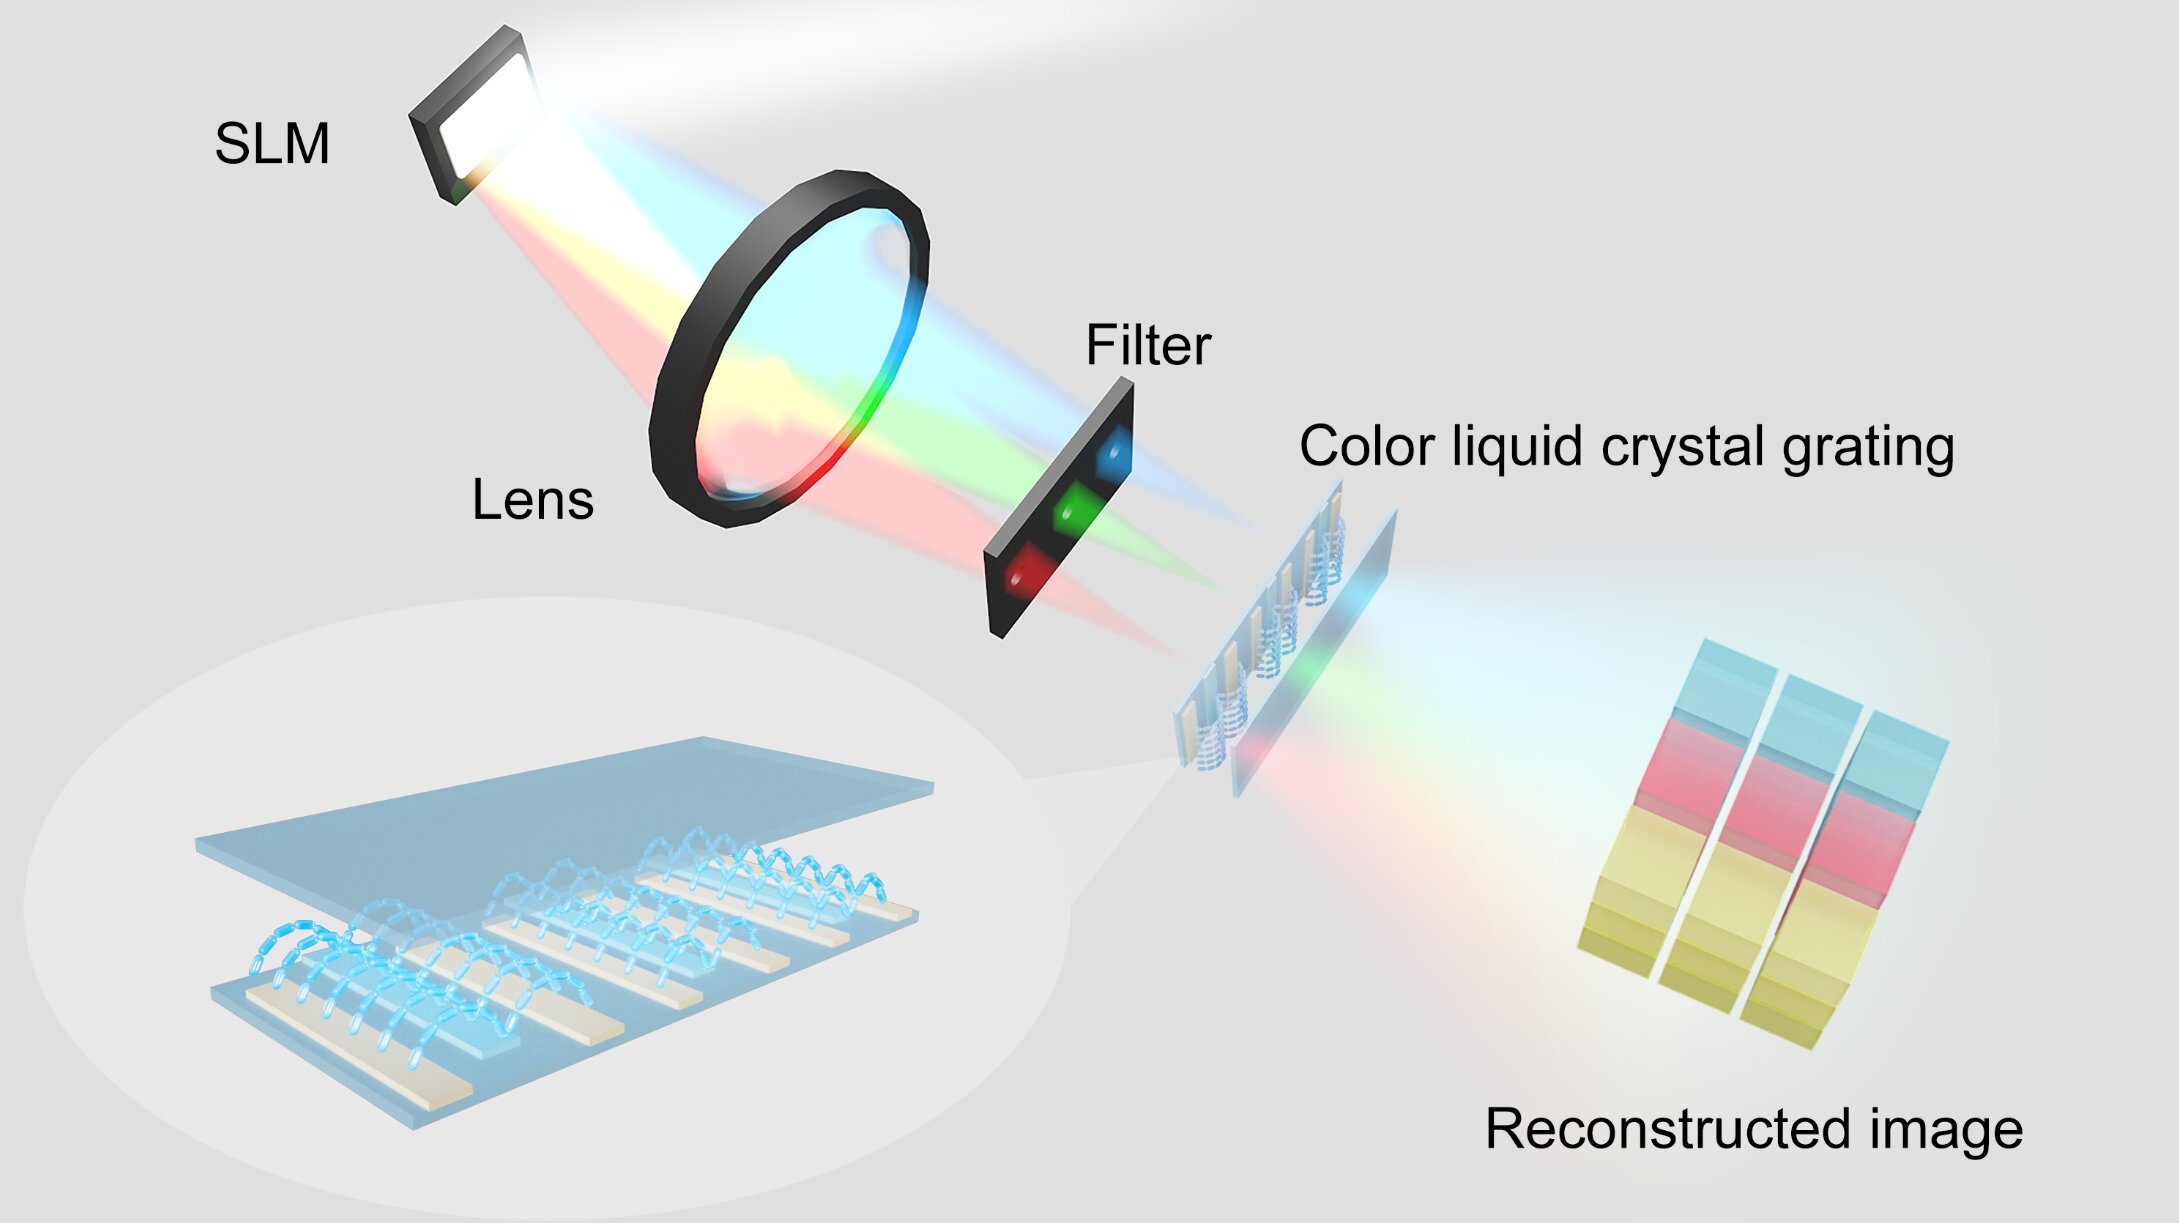 3D printing technology achieves precision light control for